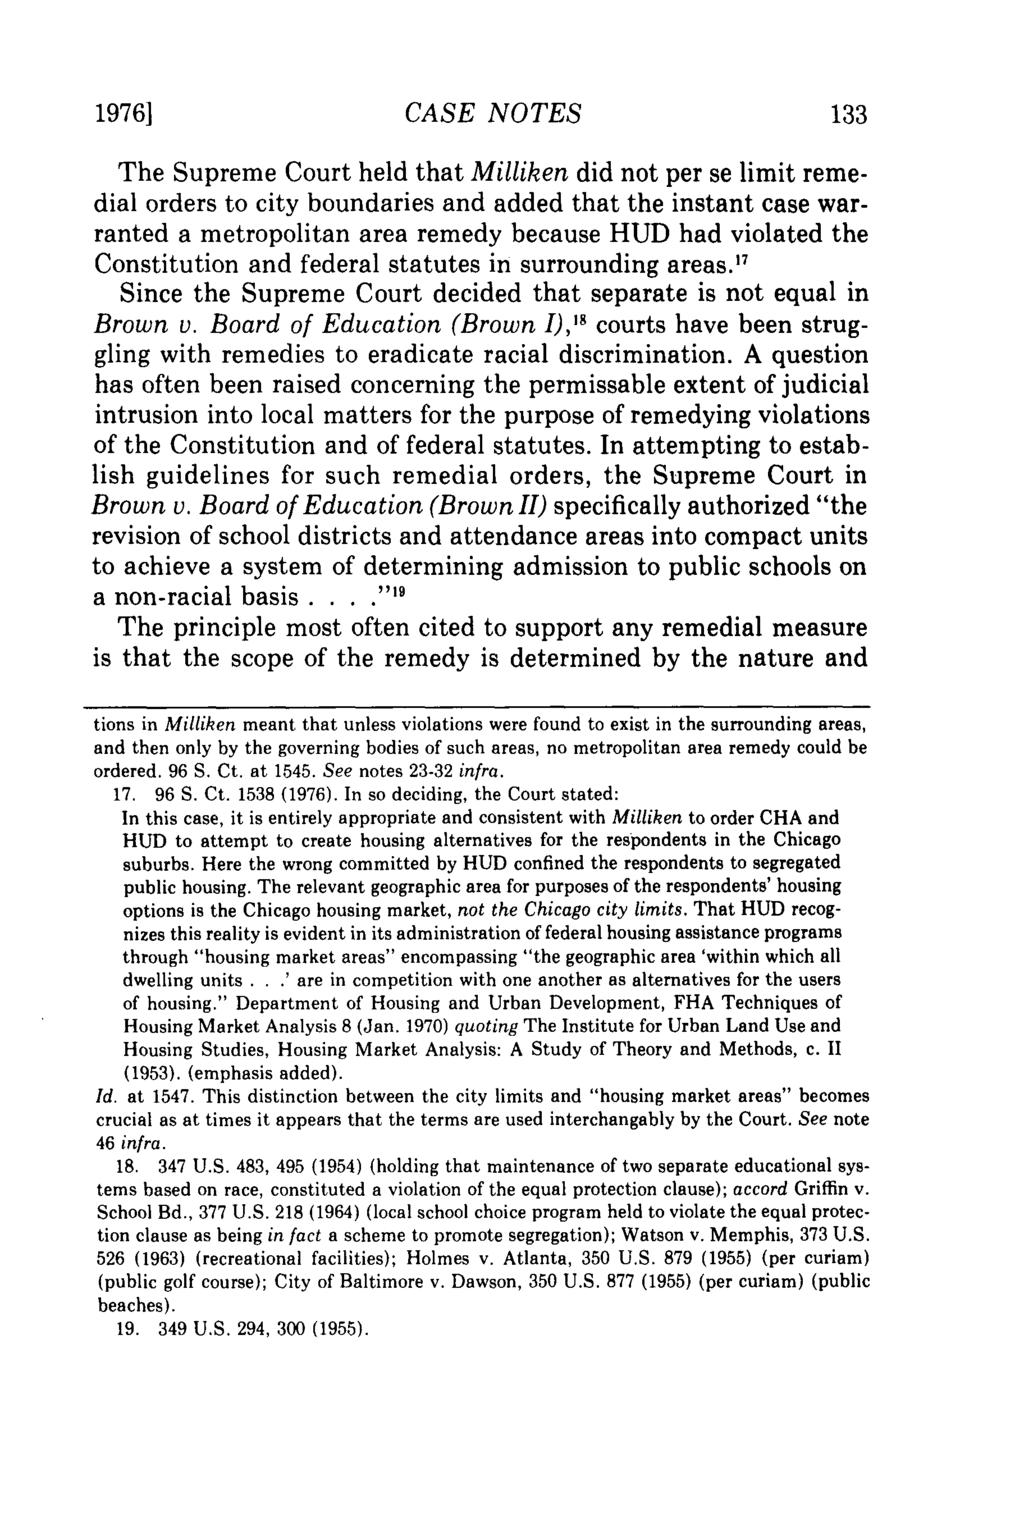 19761 CASE NOTES The Supreme Court held that Milliken did not per se limit remedial orders to city boundaries and added that the instant case warranted a metropolitan area remedy because HUD had